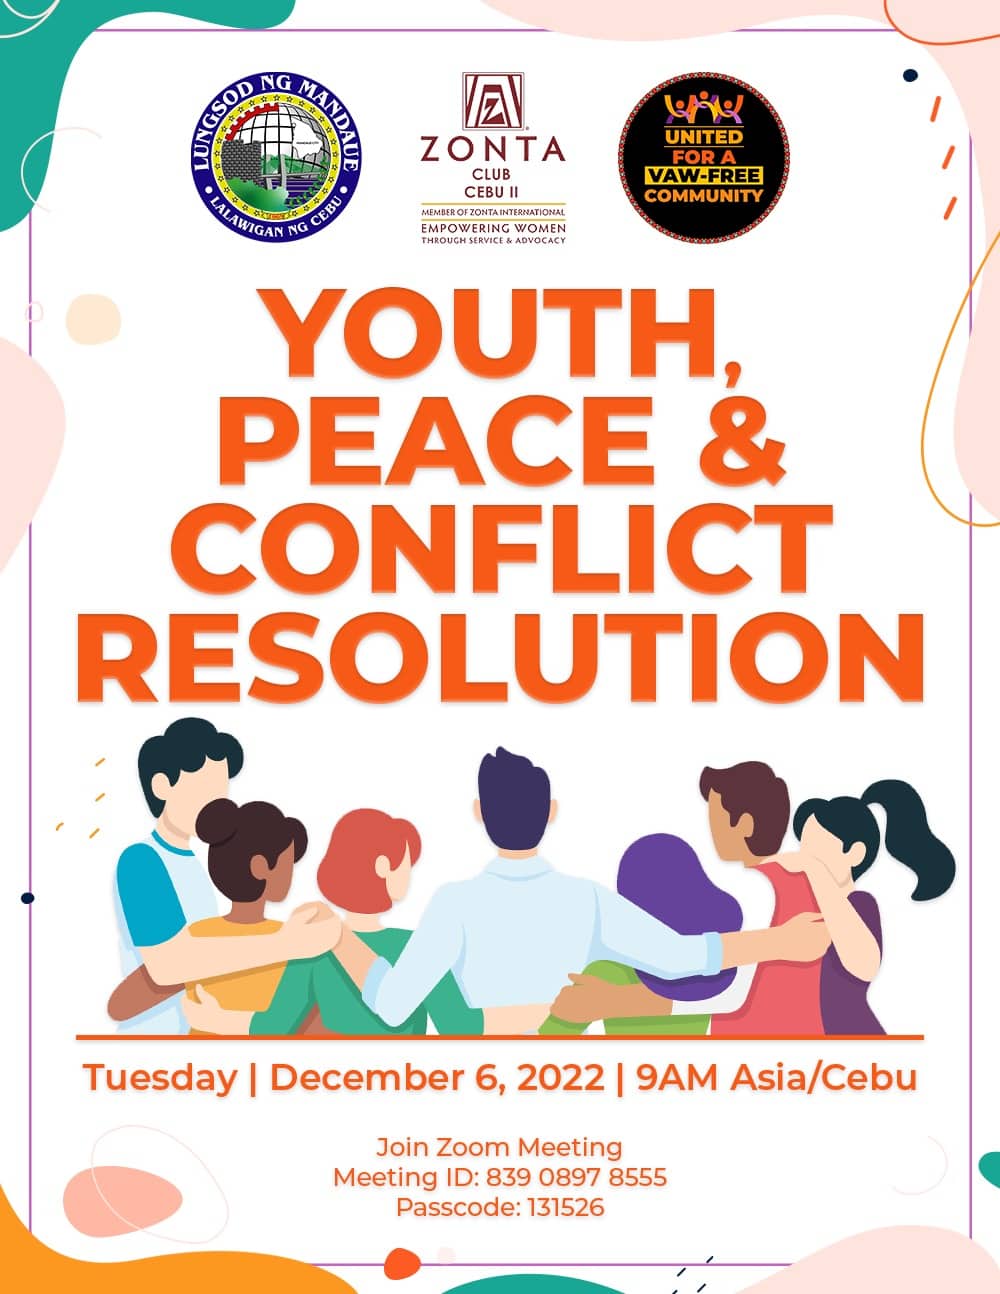 C:\Users\GCPI-ROBBY\Desktop\PRS\PR 1 - ZONTA 18 DAYS OF ACTIVISM\POSTER YOUTH PEACE & CONFLICT RESOLUTION.jpg